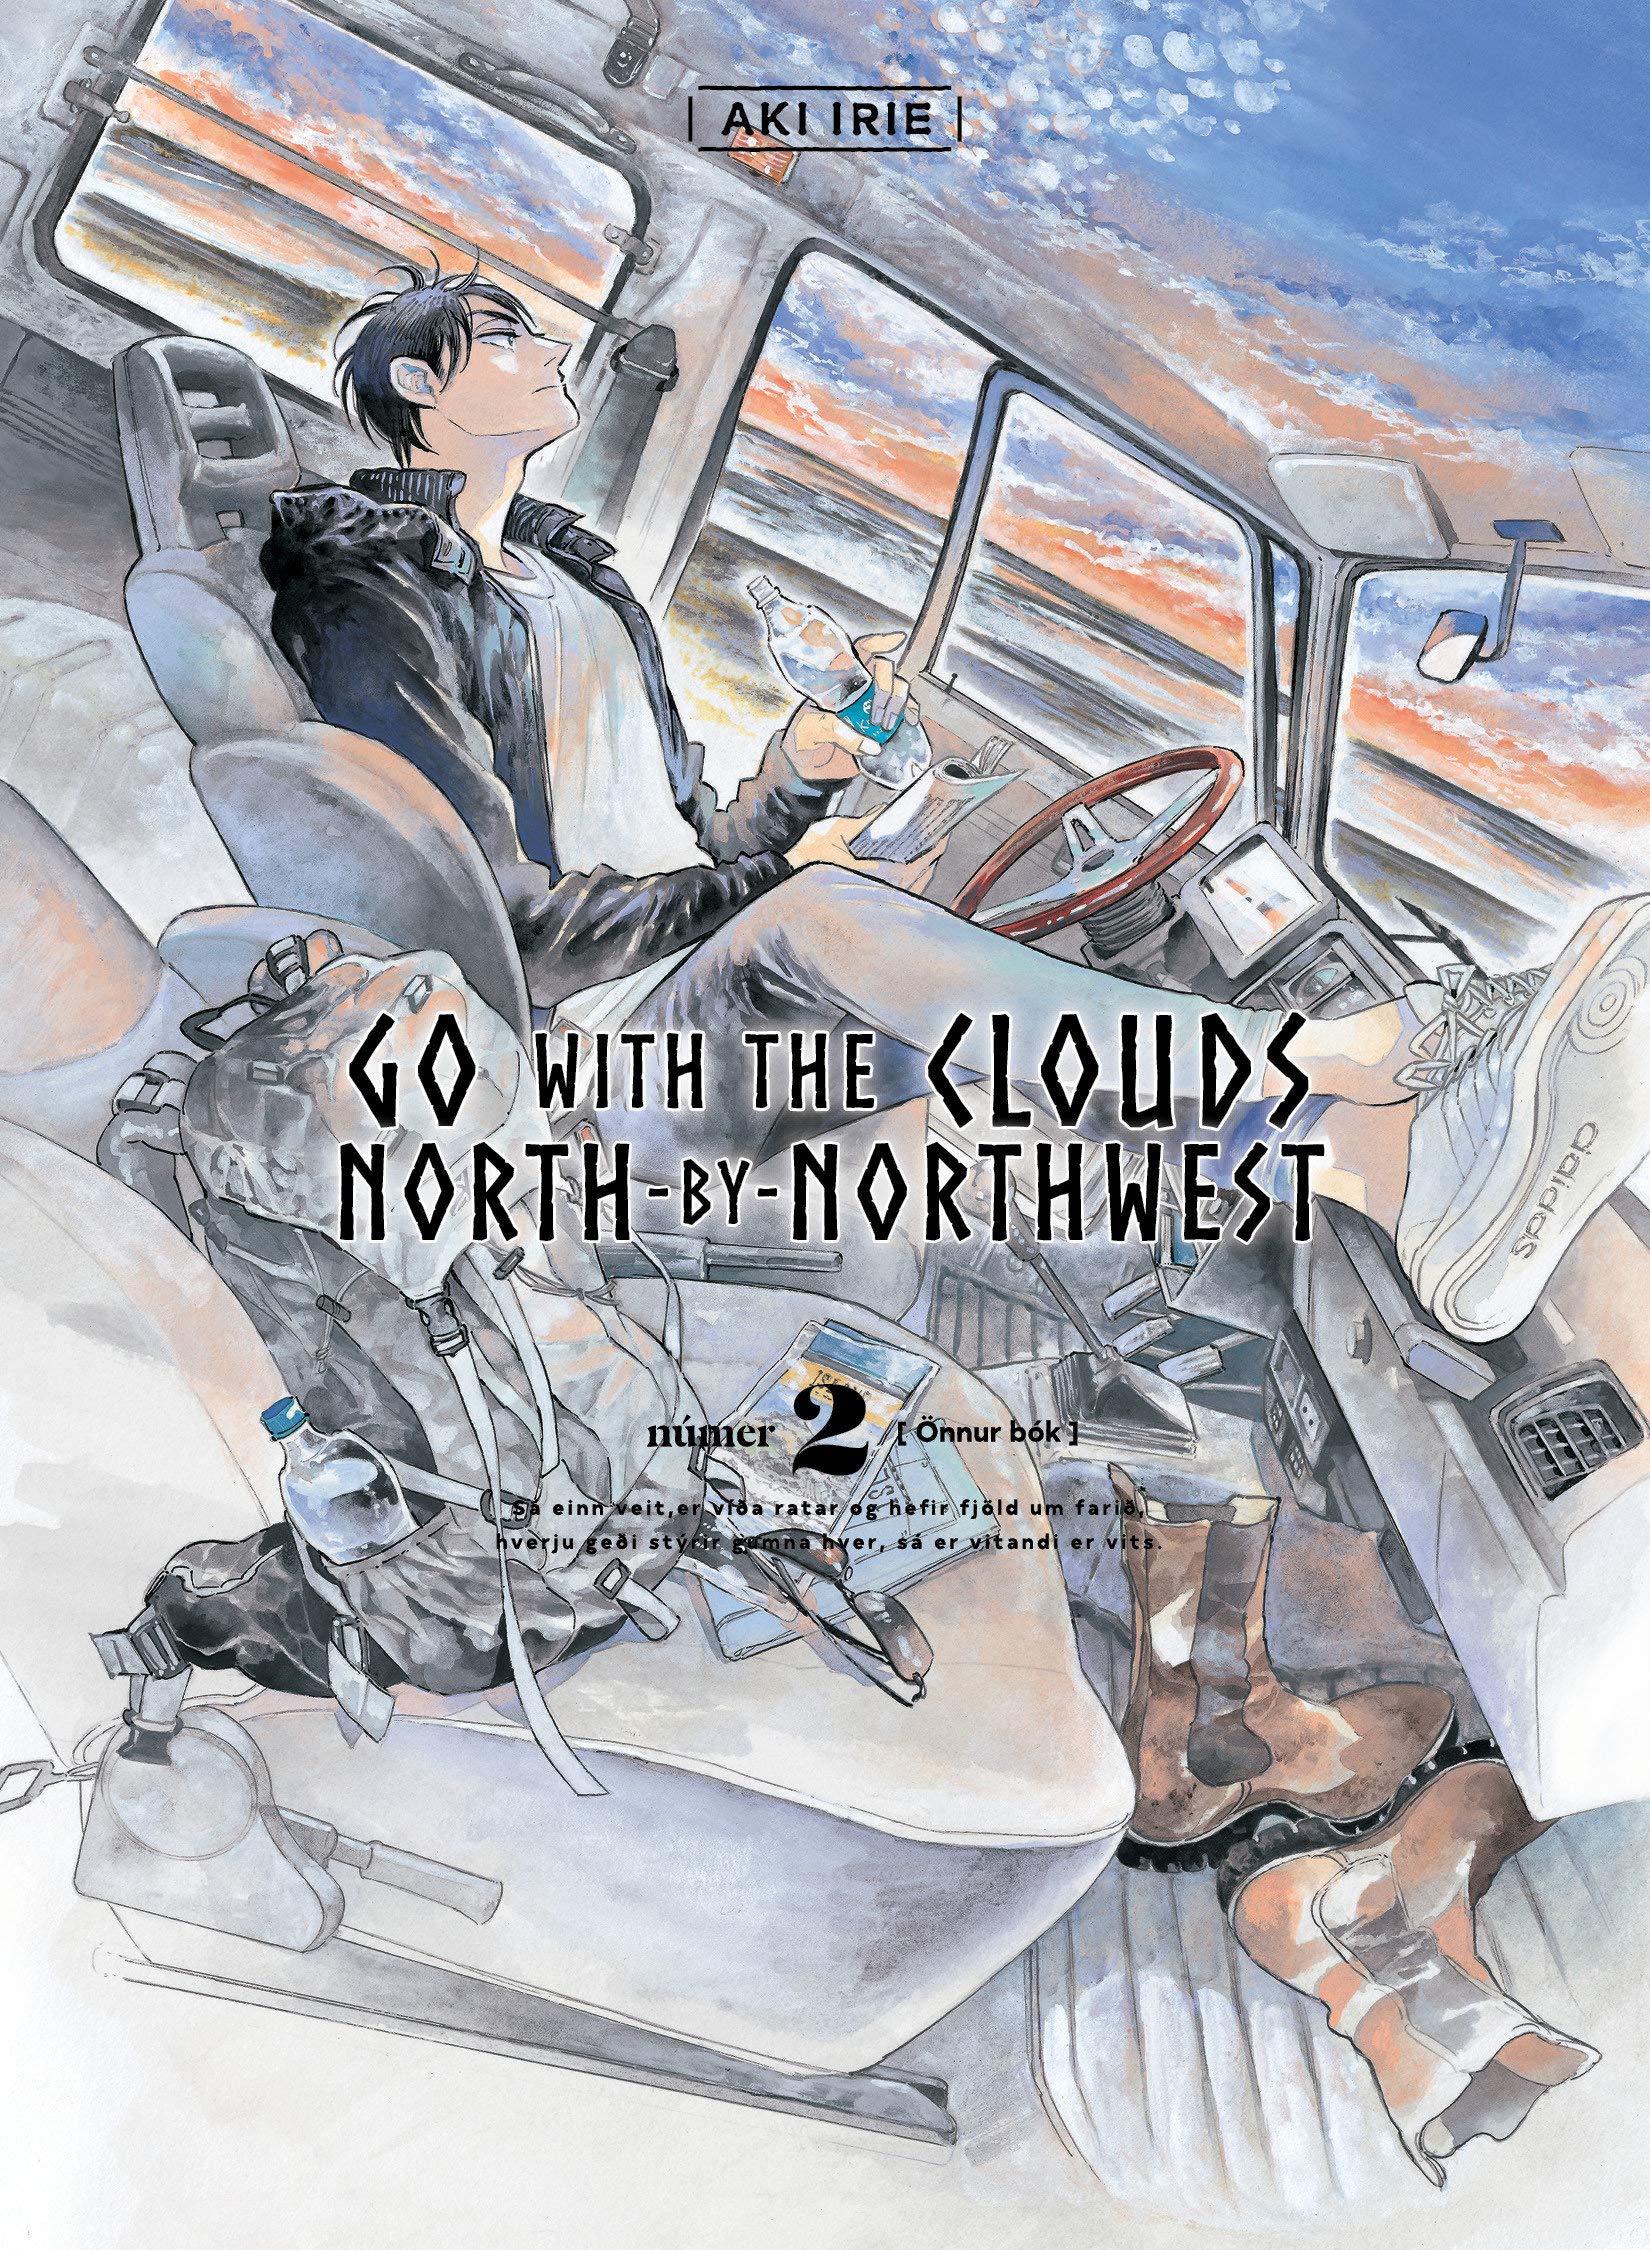 Go With the Clouds North by Northwest Manga Volume 2